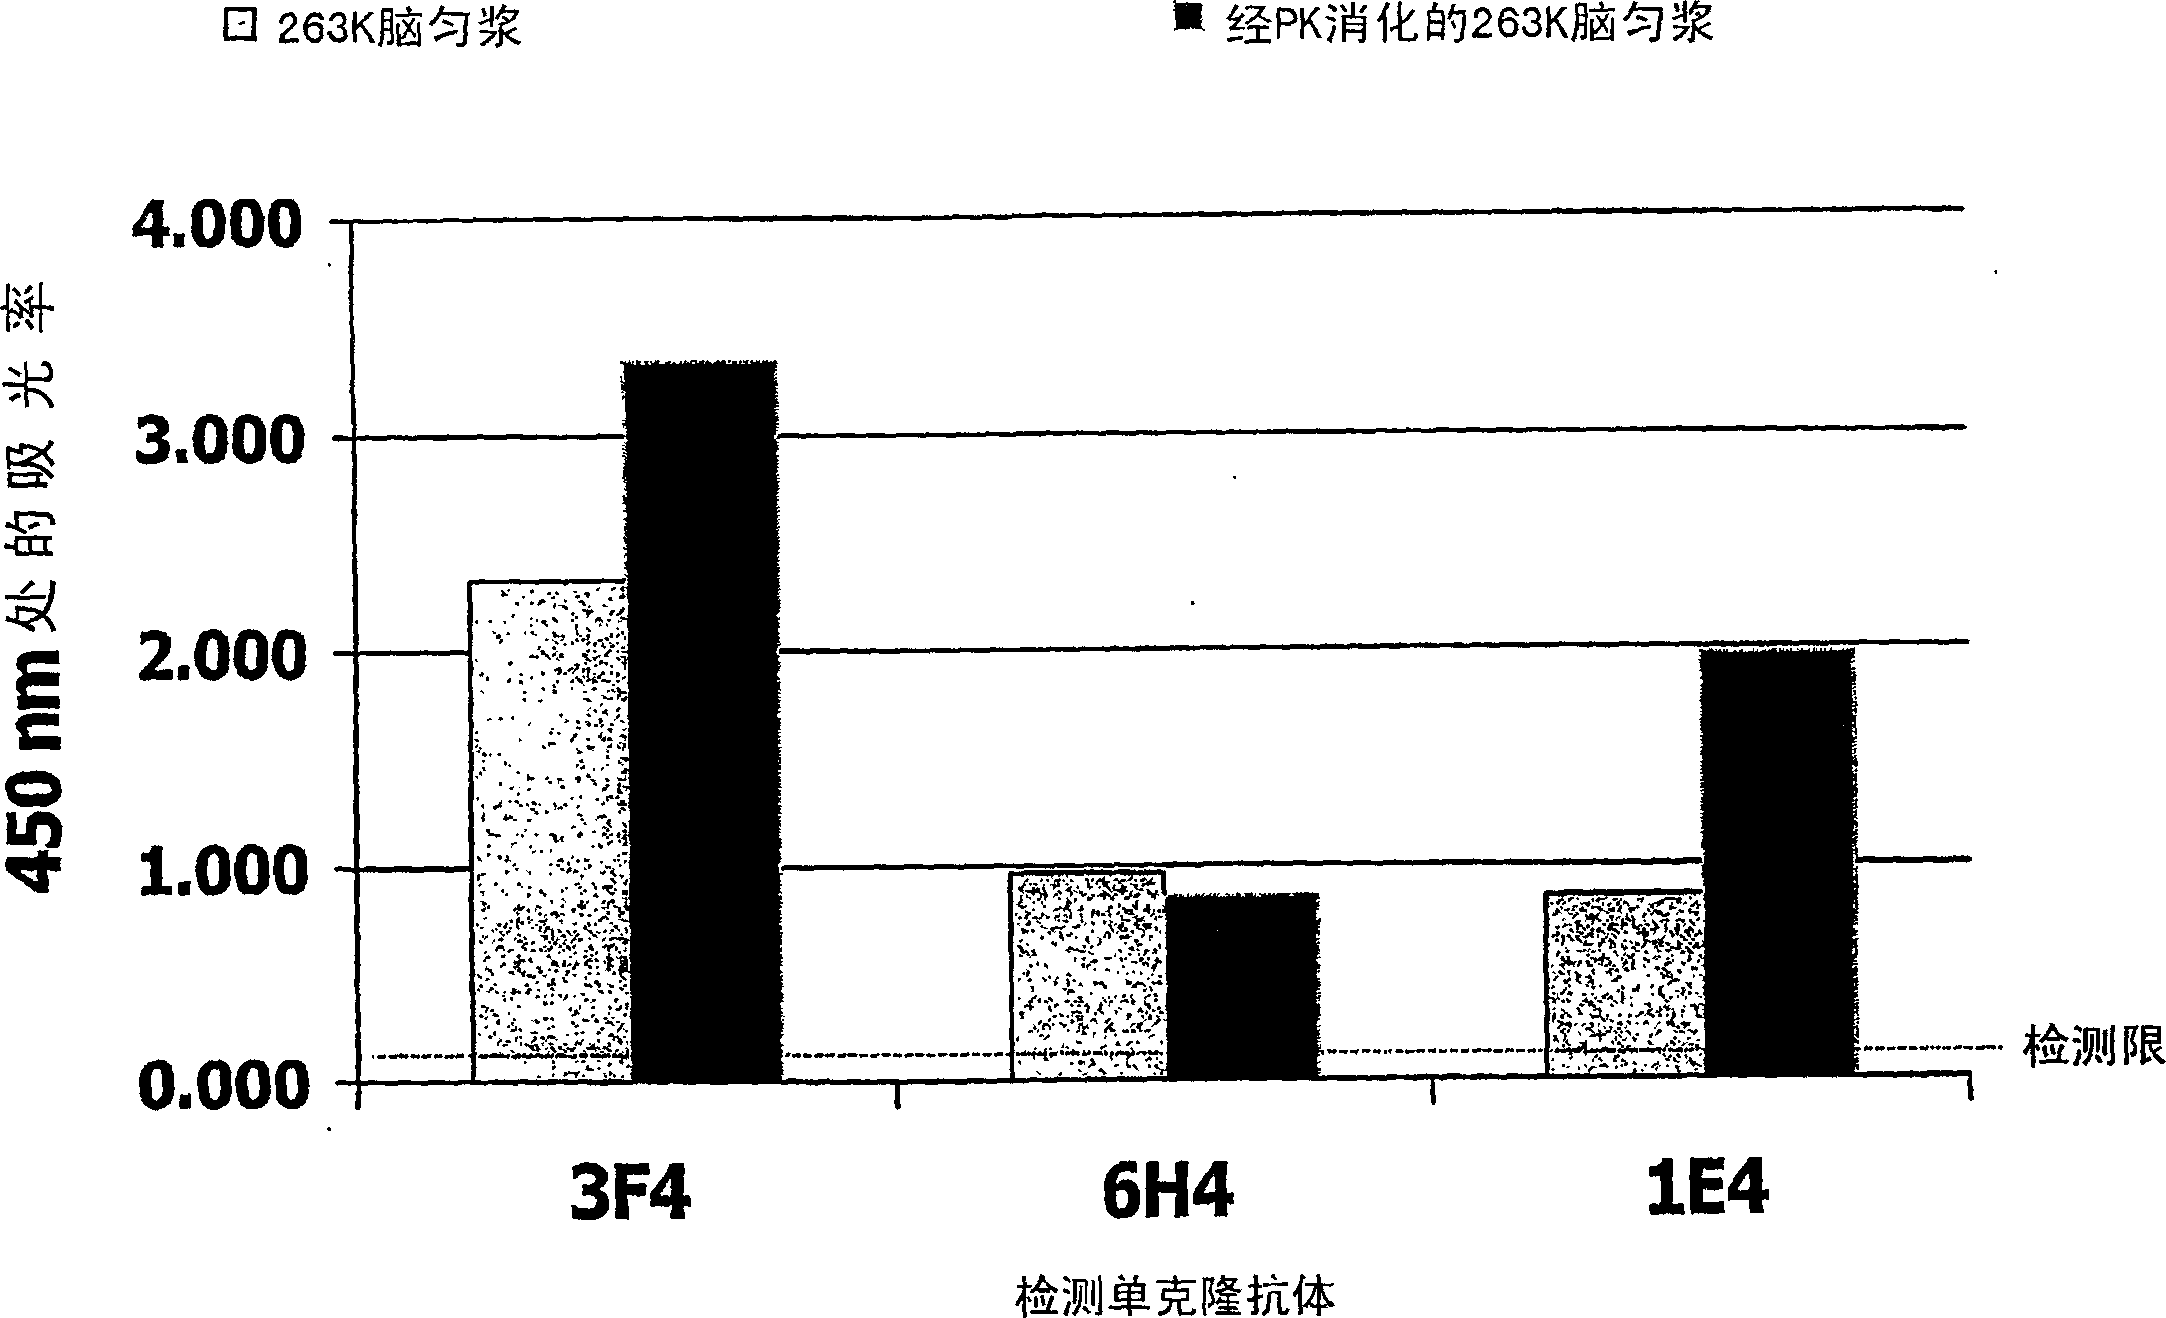 Method for the detection of a pathogenic form of a prion protein